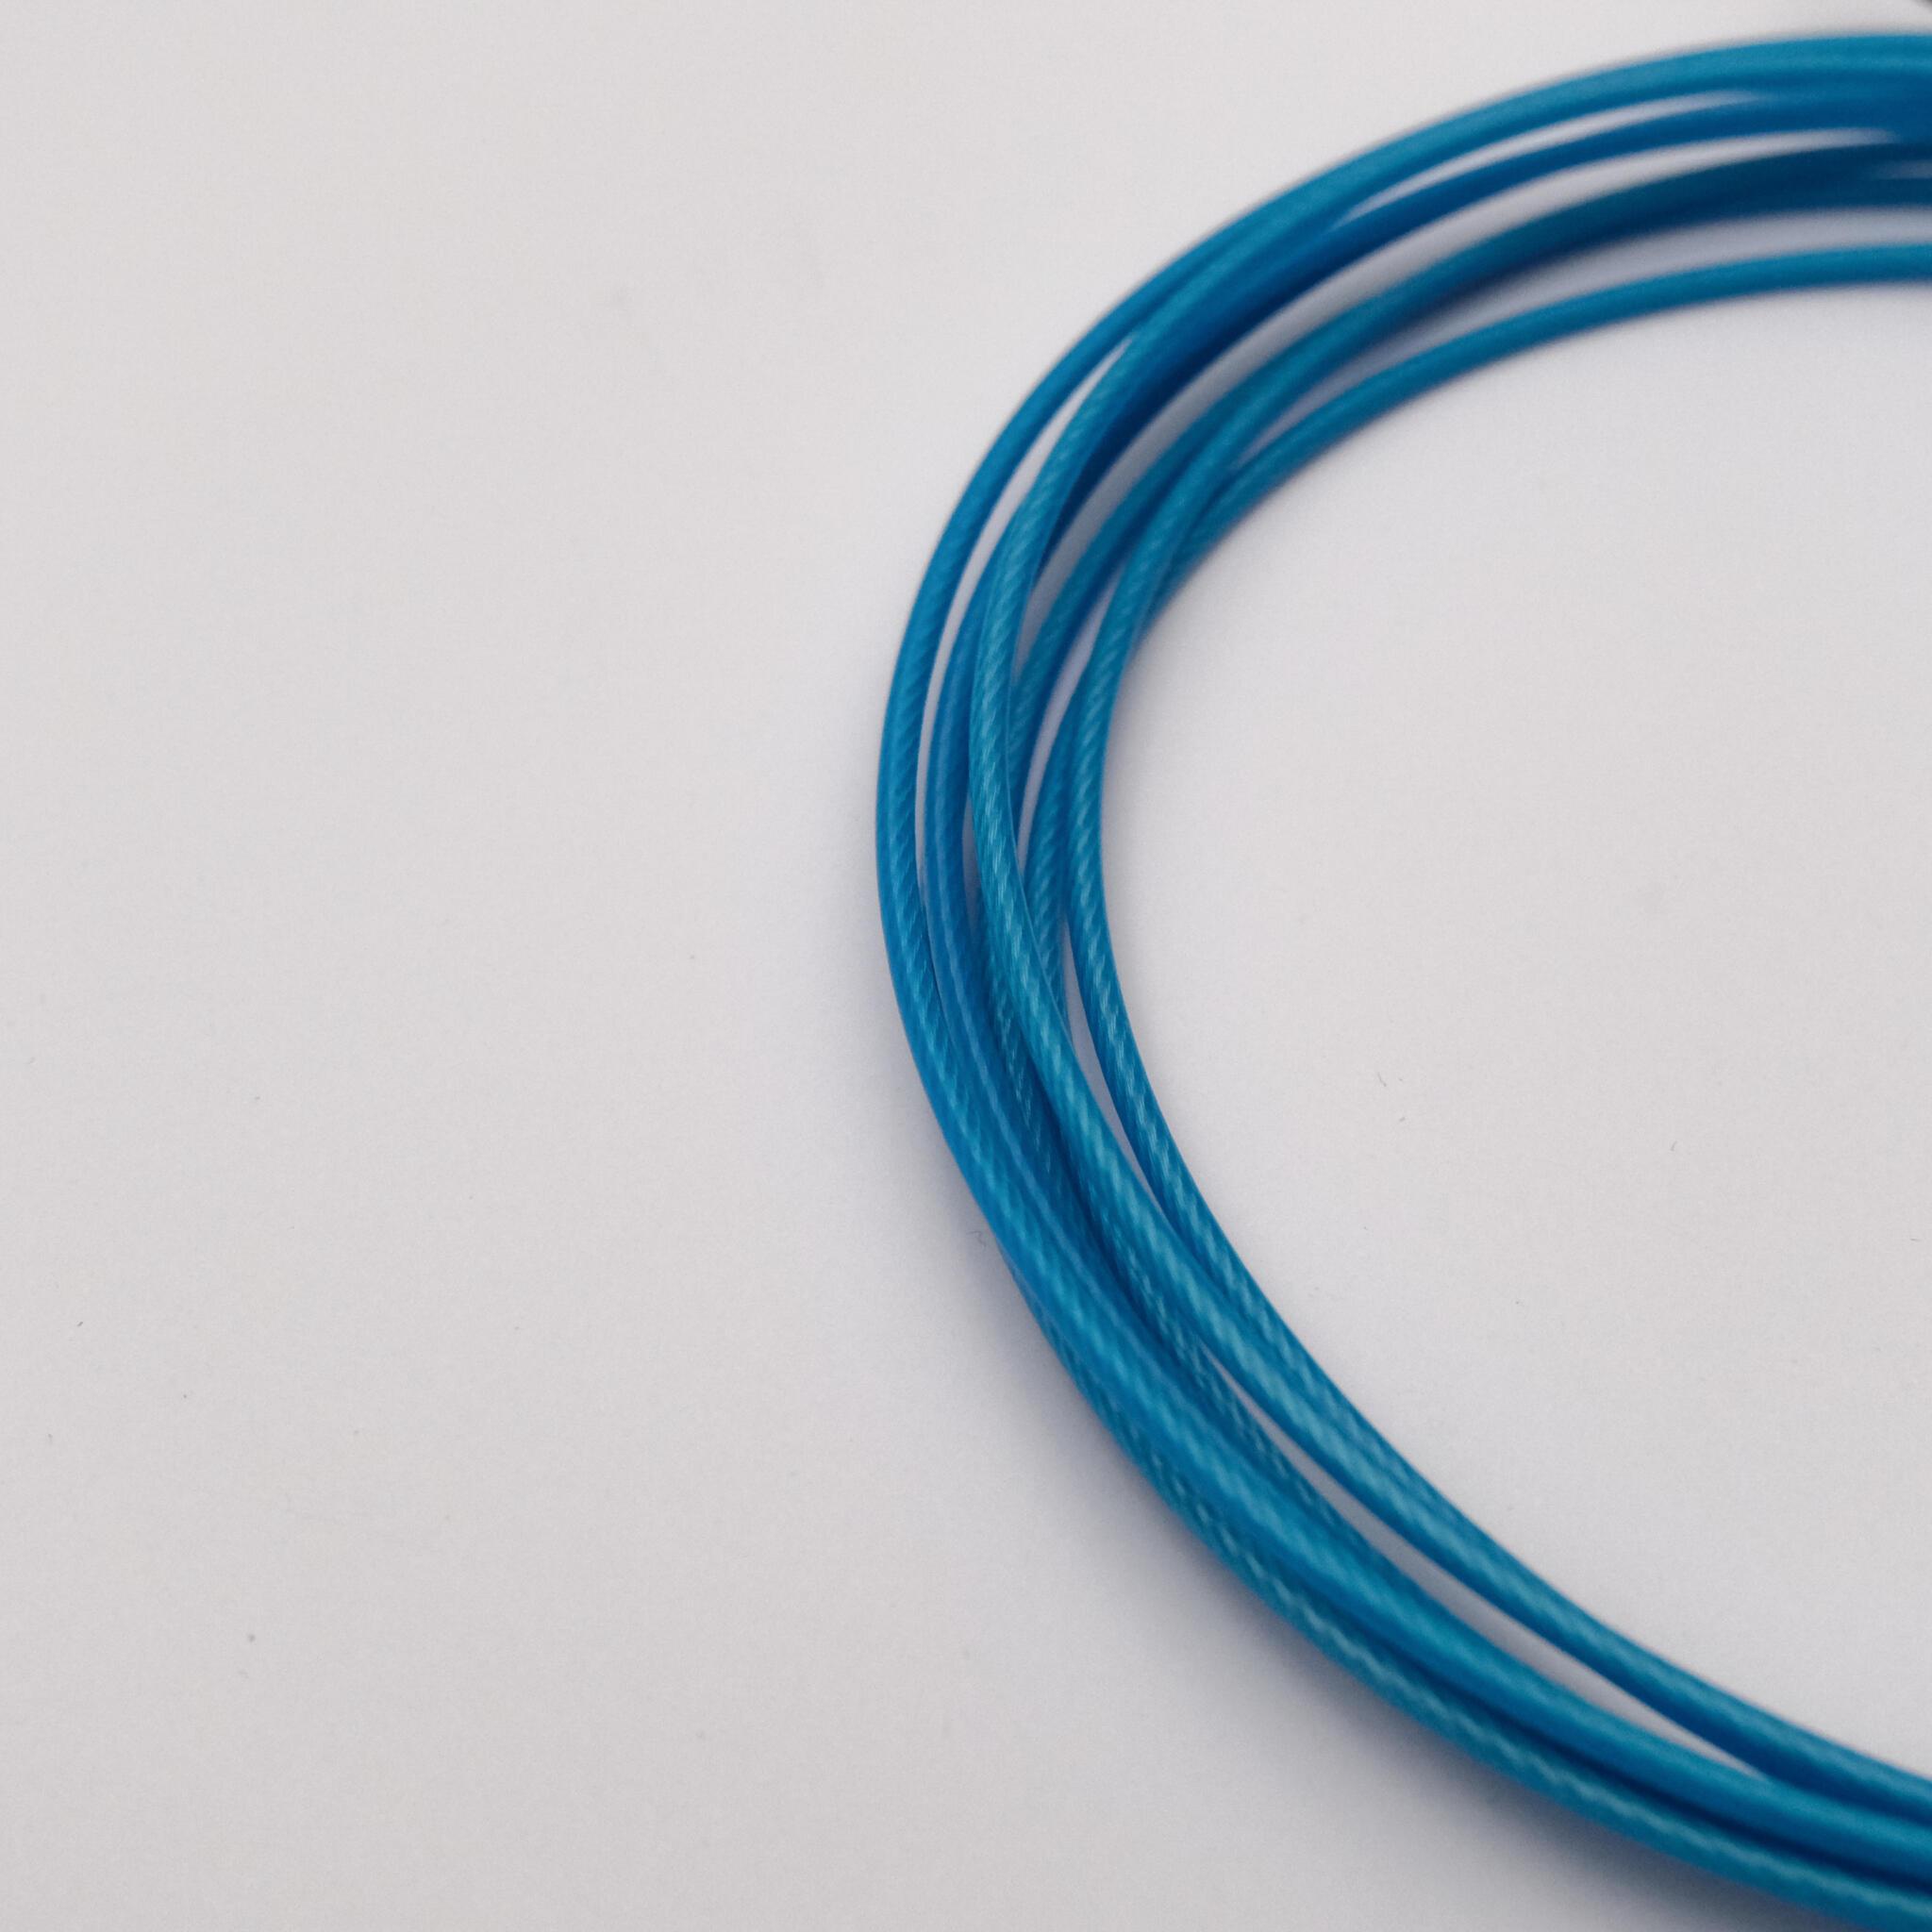 Arox - 2.0 mm pcs coated wire